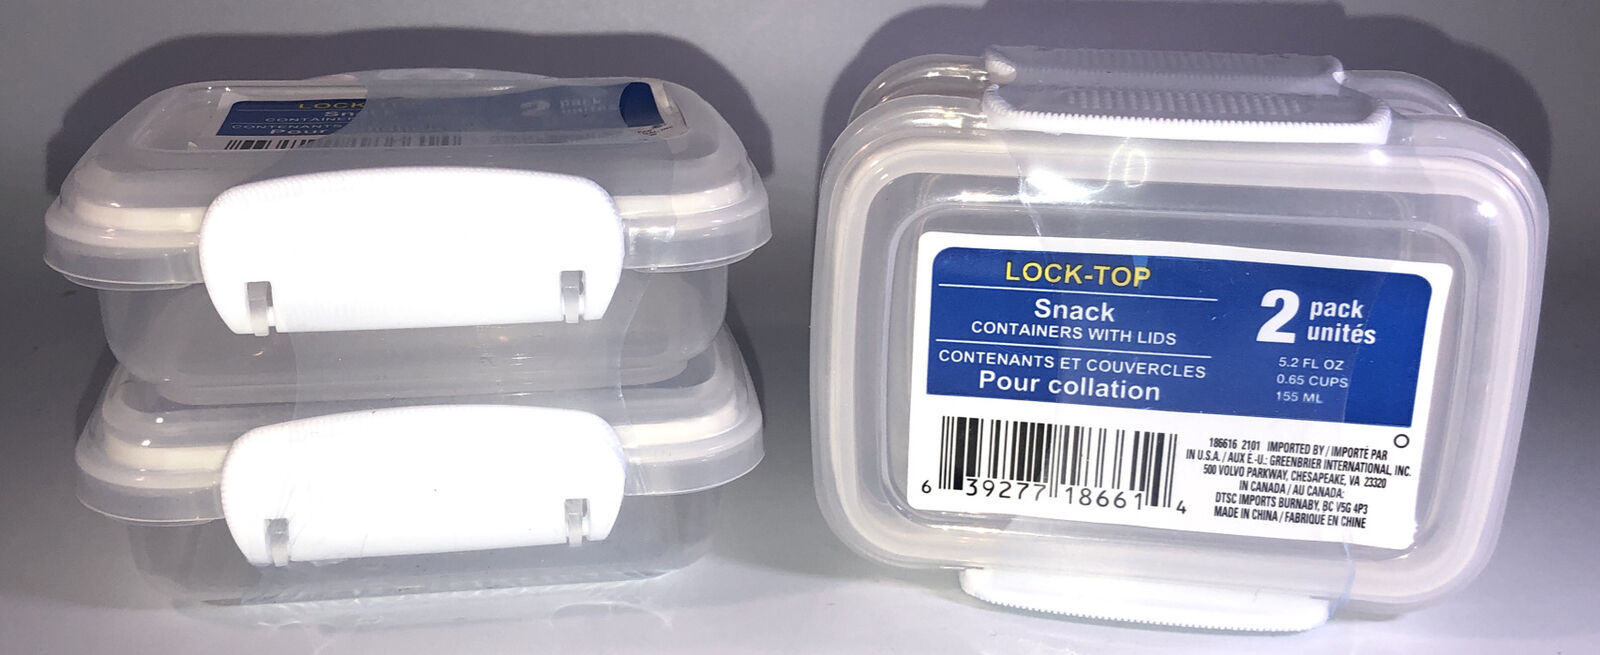 Snack Containers W Locking Lids 5.25oz Ea-Get Two 2-packs(4 Total)White-SHIP24HR